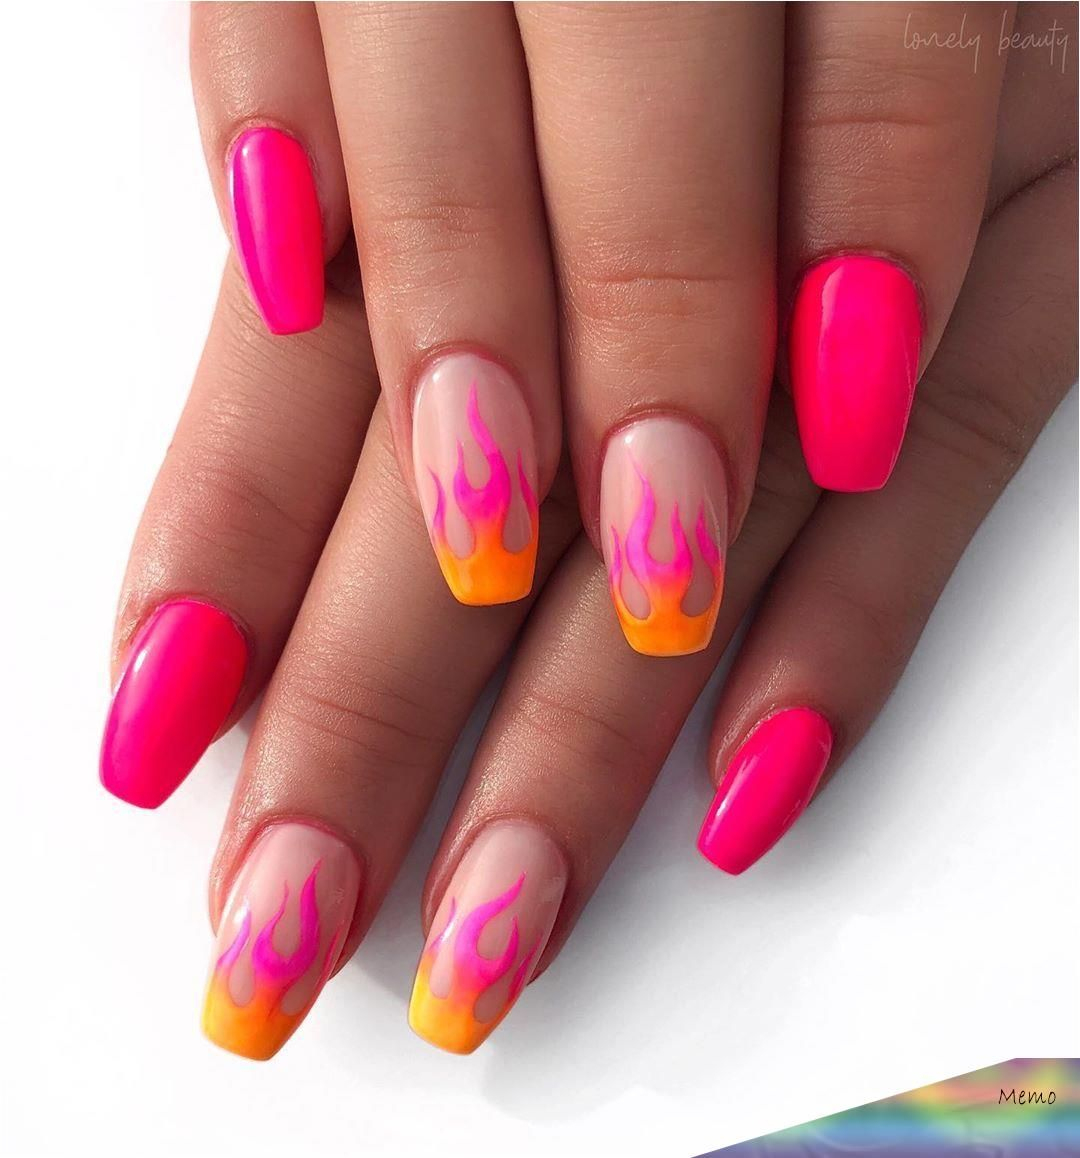 Mar 24, 2020 - Neon Nail Trend Is Going Crazy. If You Are Someone Who avec Idee Ongles Rose Fluo vous pouvez essayer 